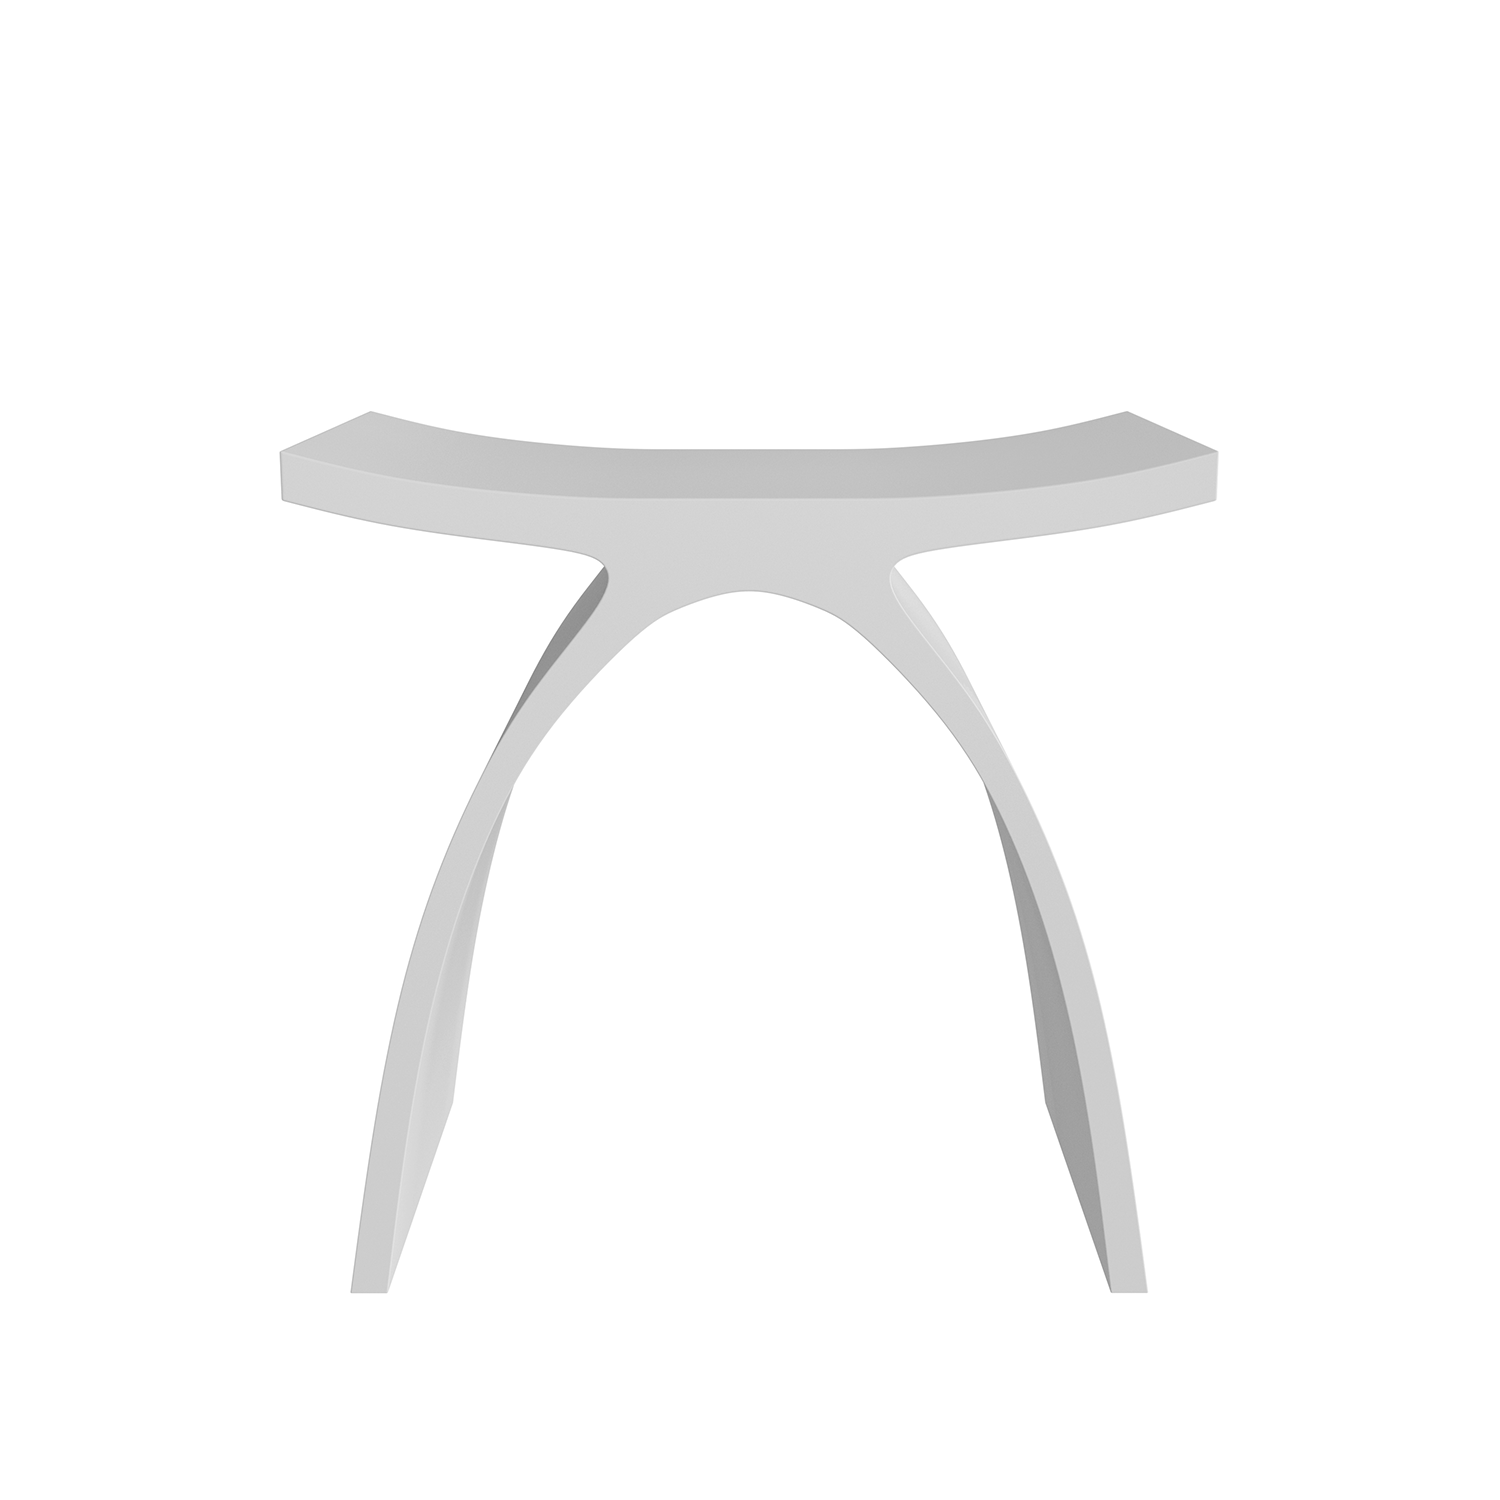 DAX Solid Surface Bathroom Stool, Standfree, Matte White Finish, 16-3/4 x 16-3/4 x 9-1/16 Inches (DAX-ST-01)